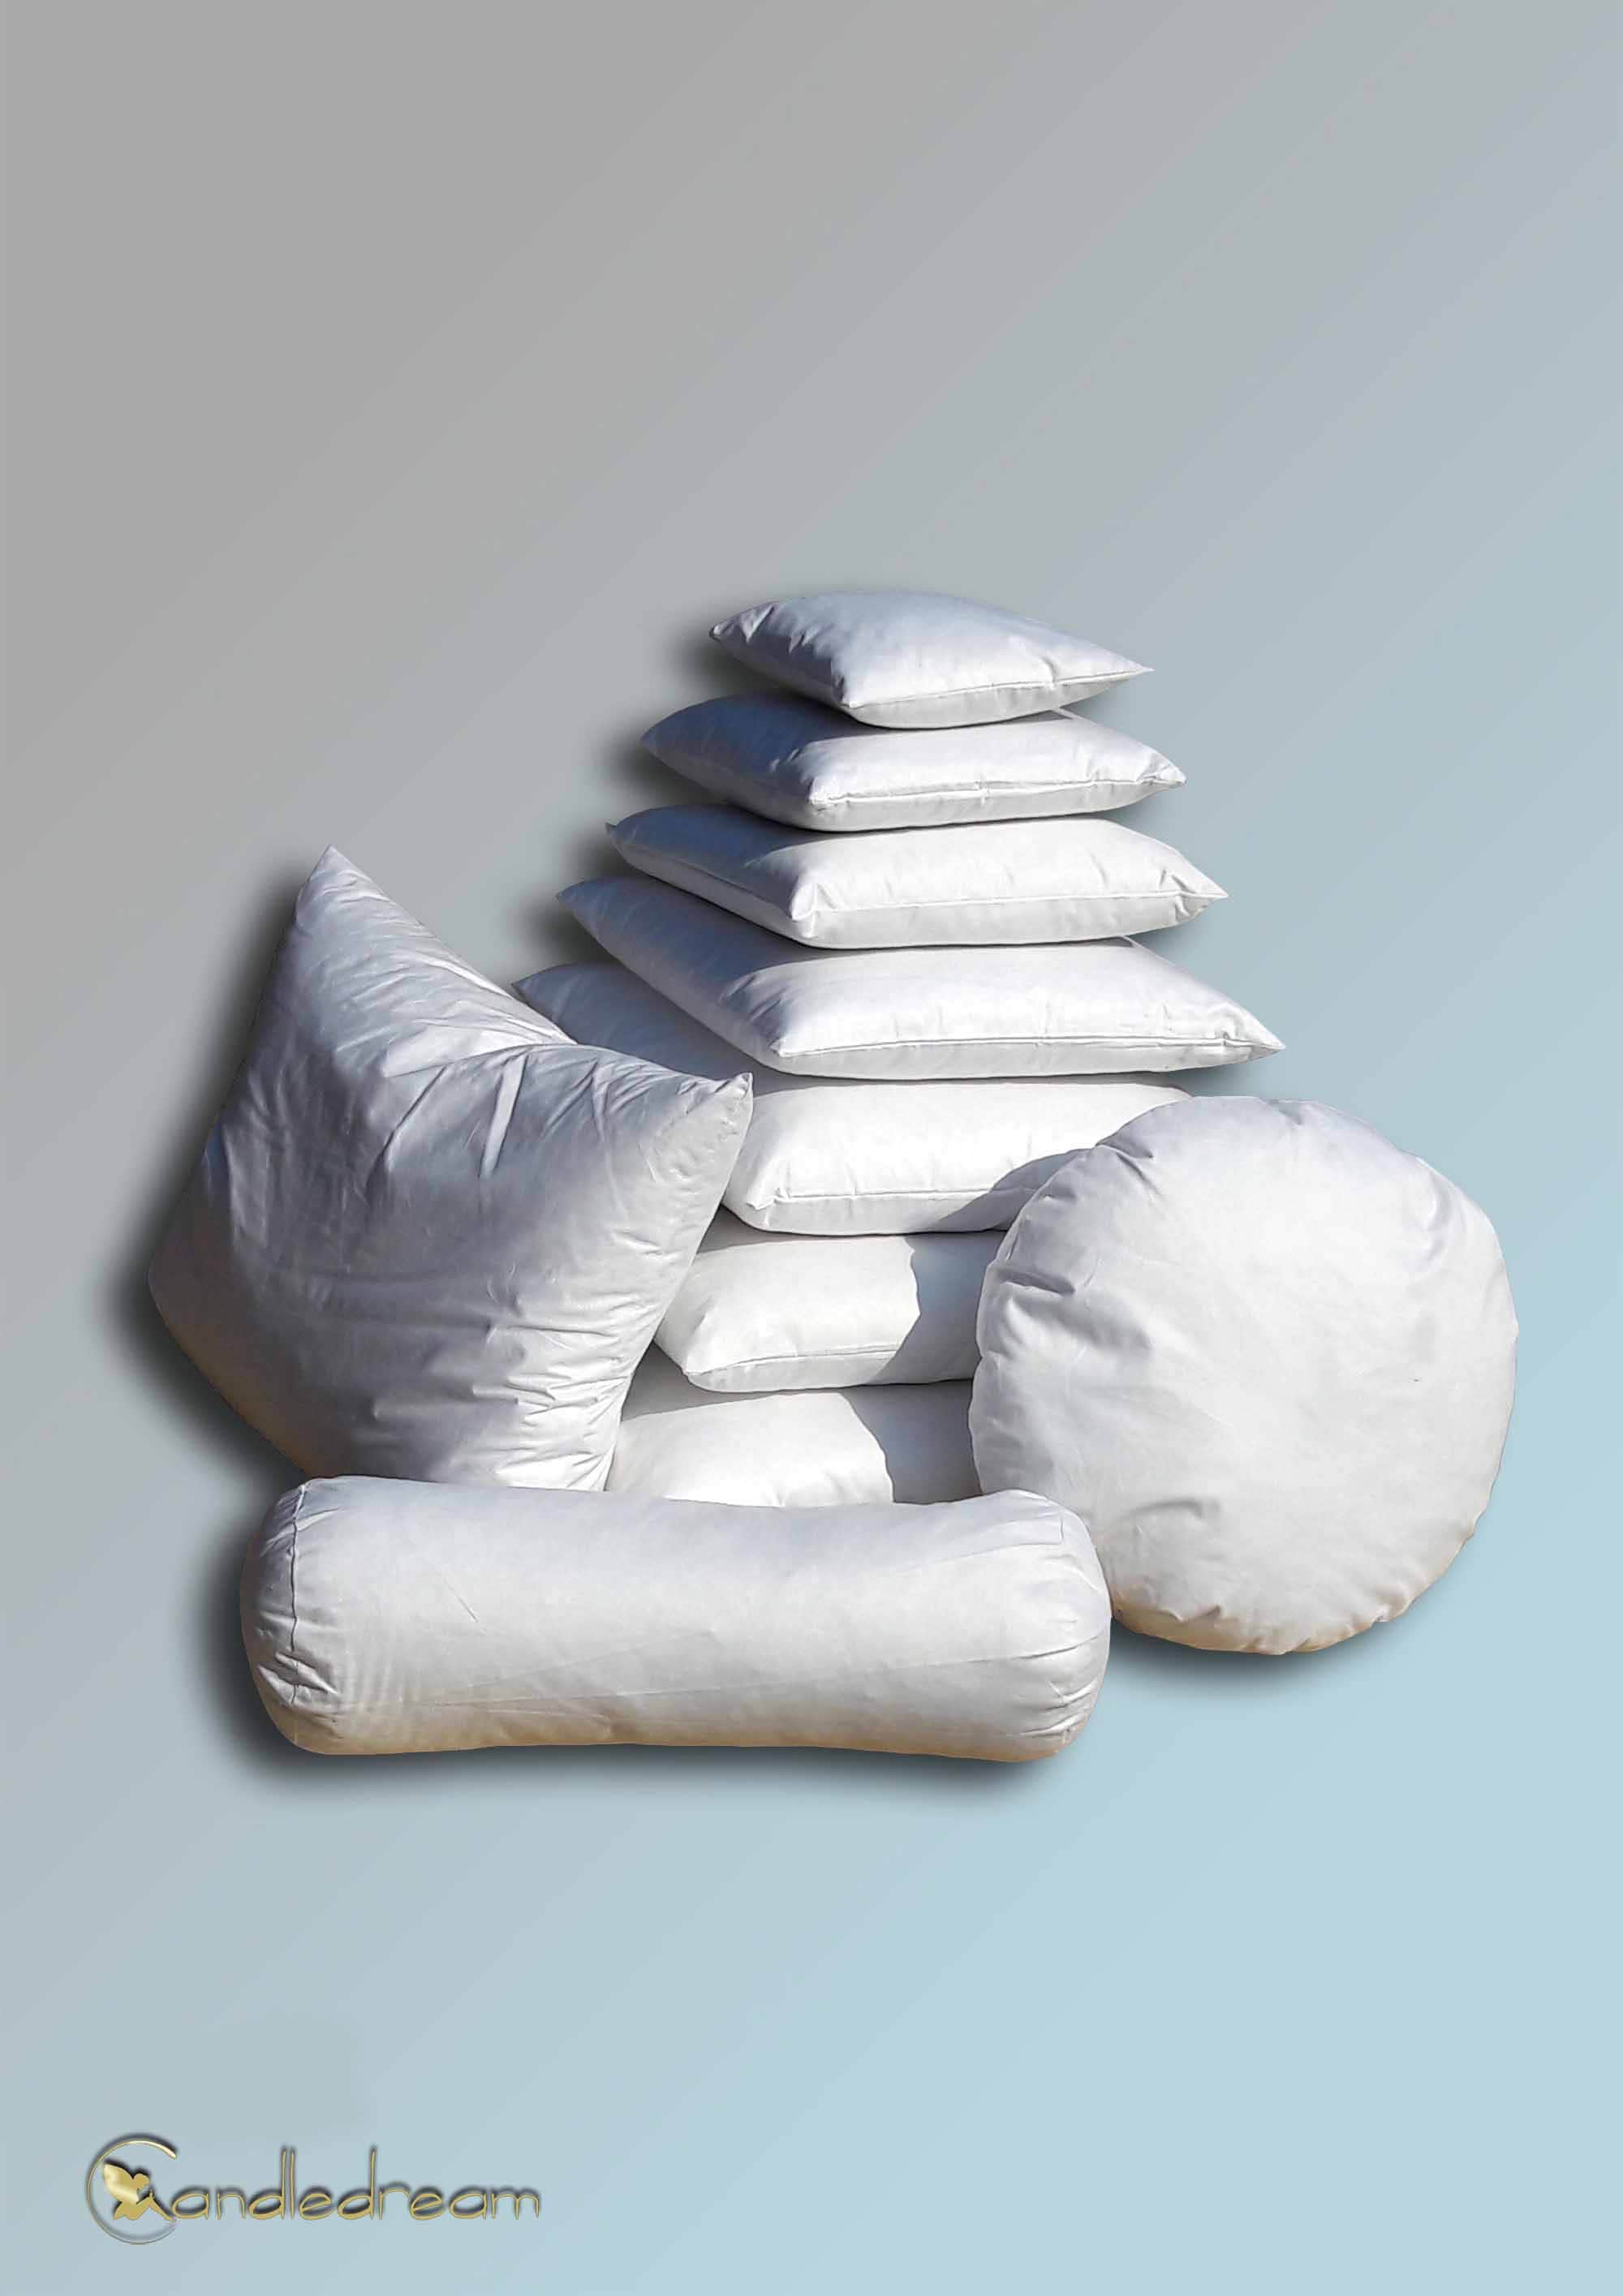 30 X 40 Cm Filling Cushion With Plump 300 G Feather Filling, Sofa Cushion,  Inner Cushion, Feather Cushion 